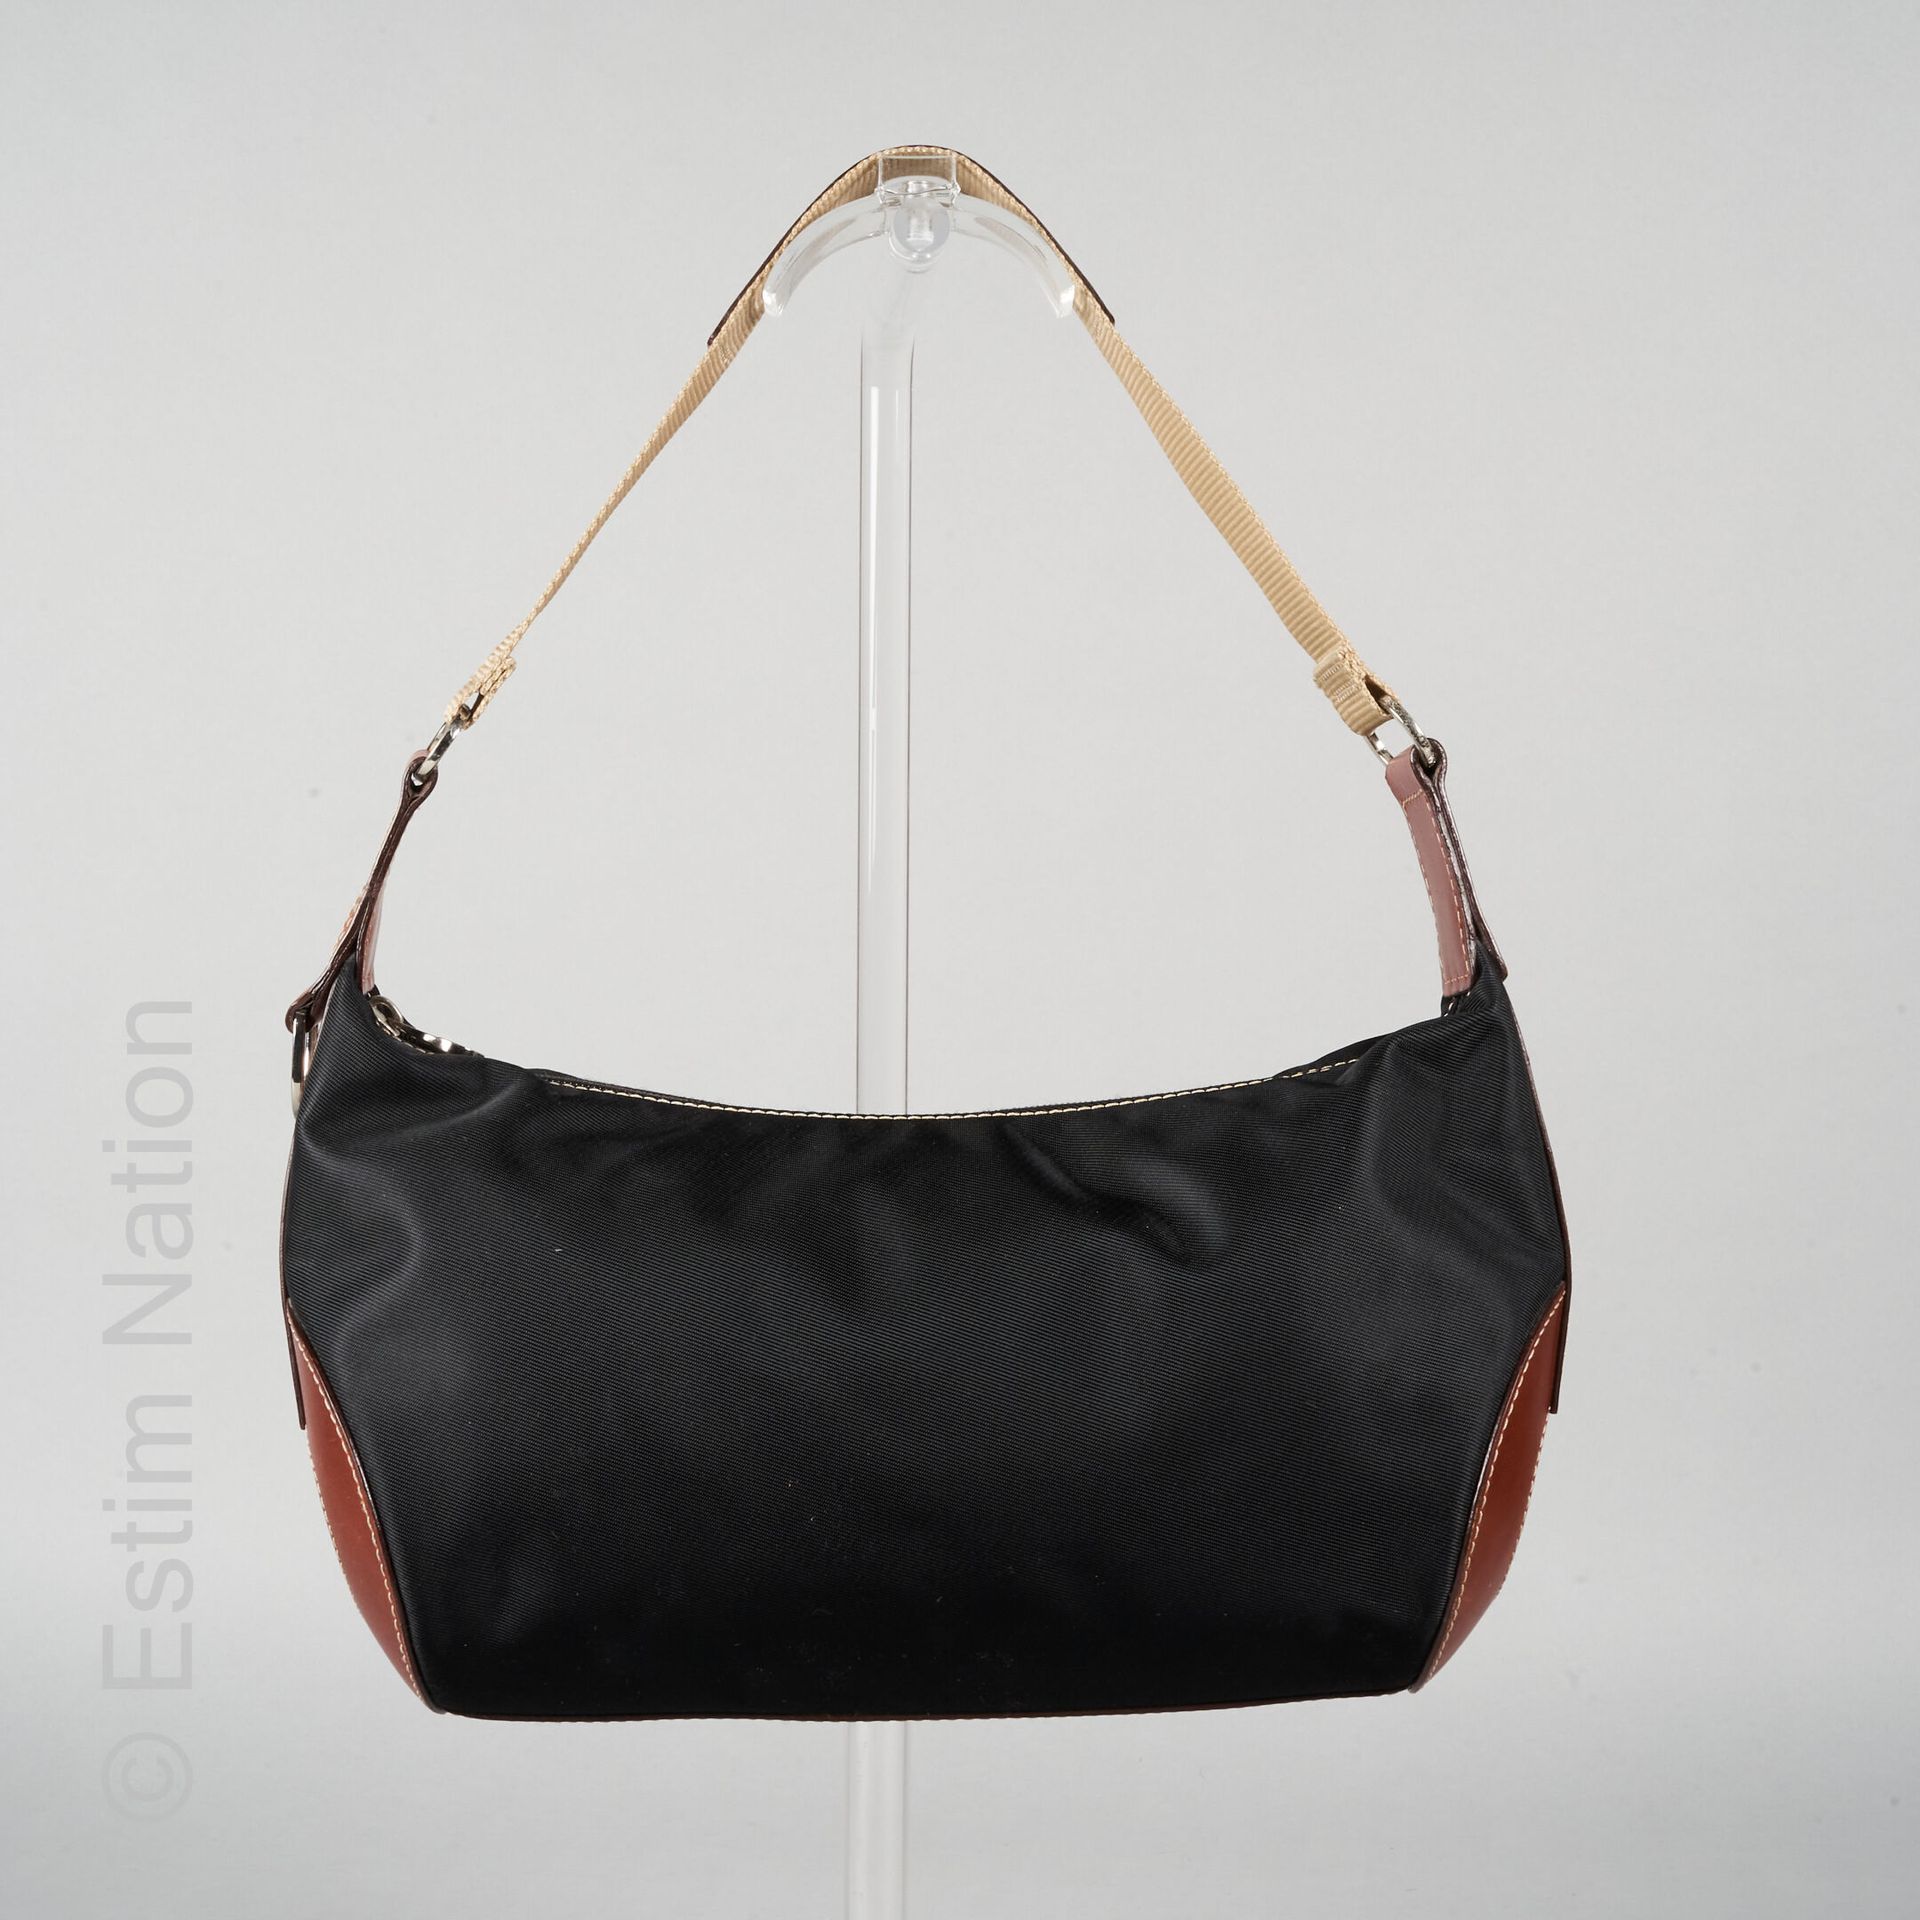 LANCEL SMALL BAG in nylon and cognac leather (20 x 30 x 9 cm) (some scratches)